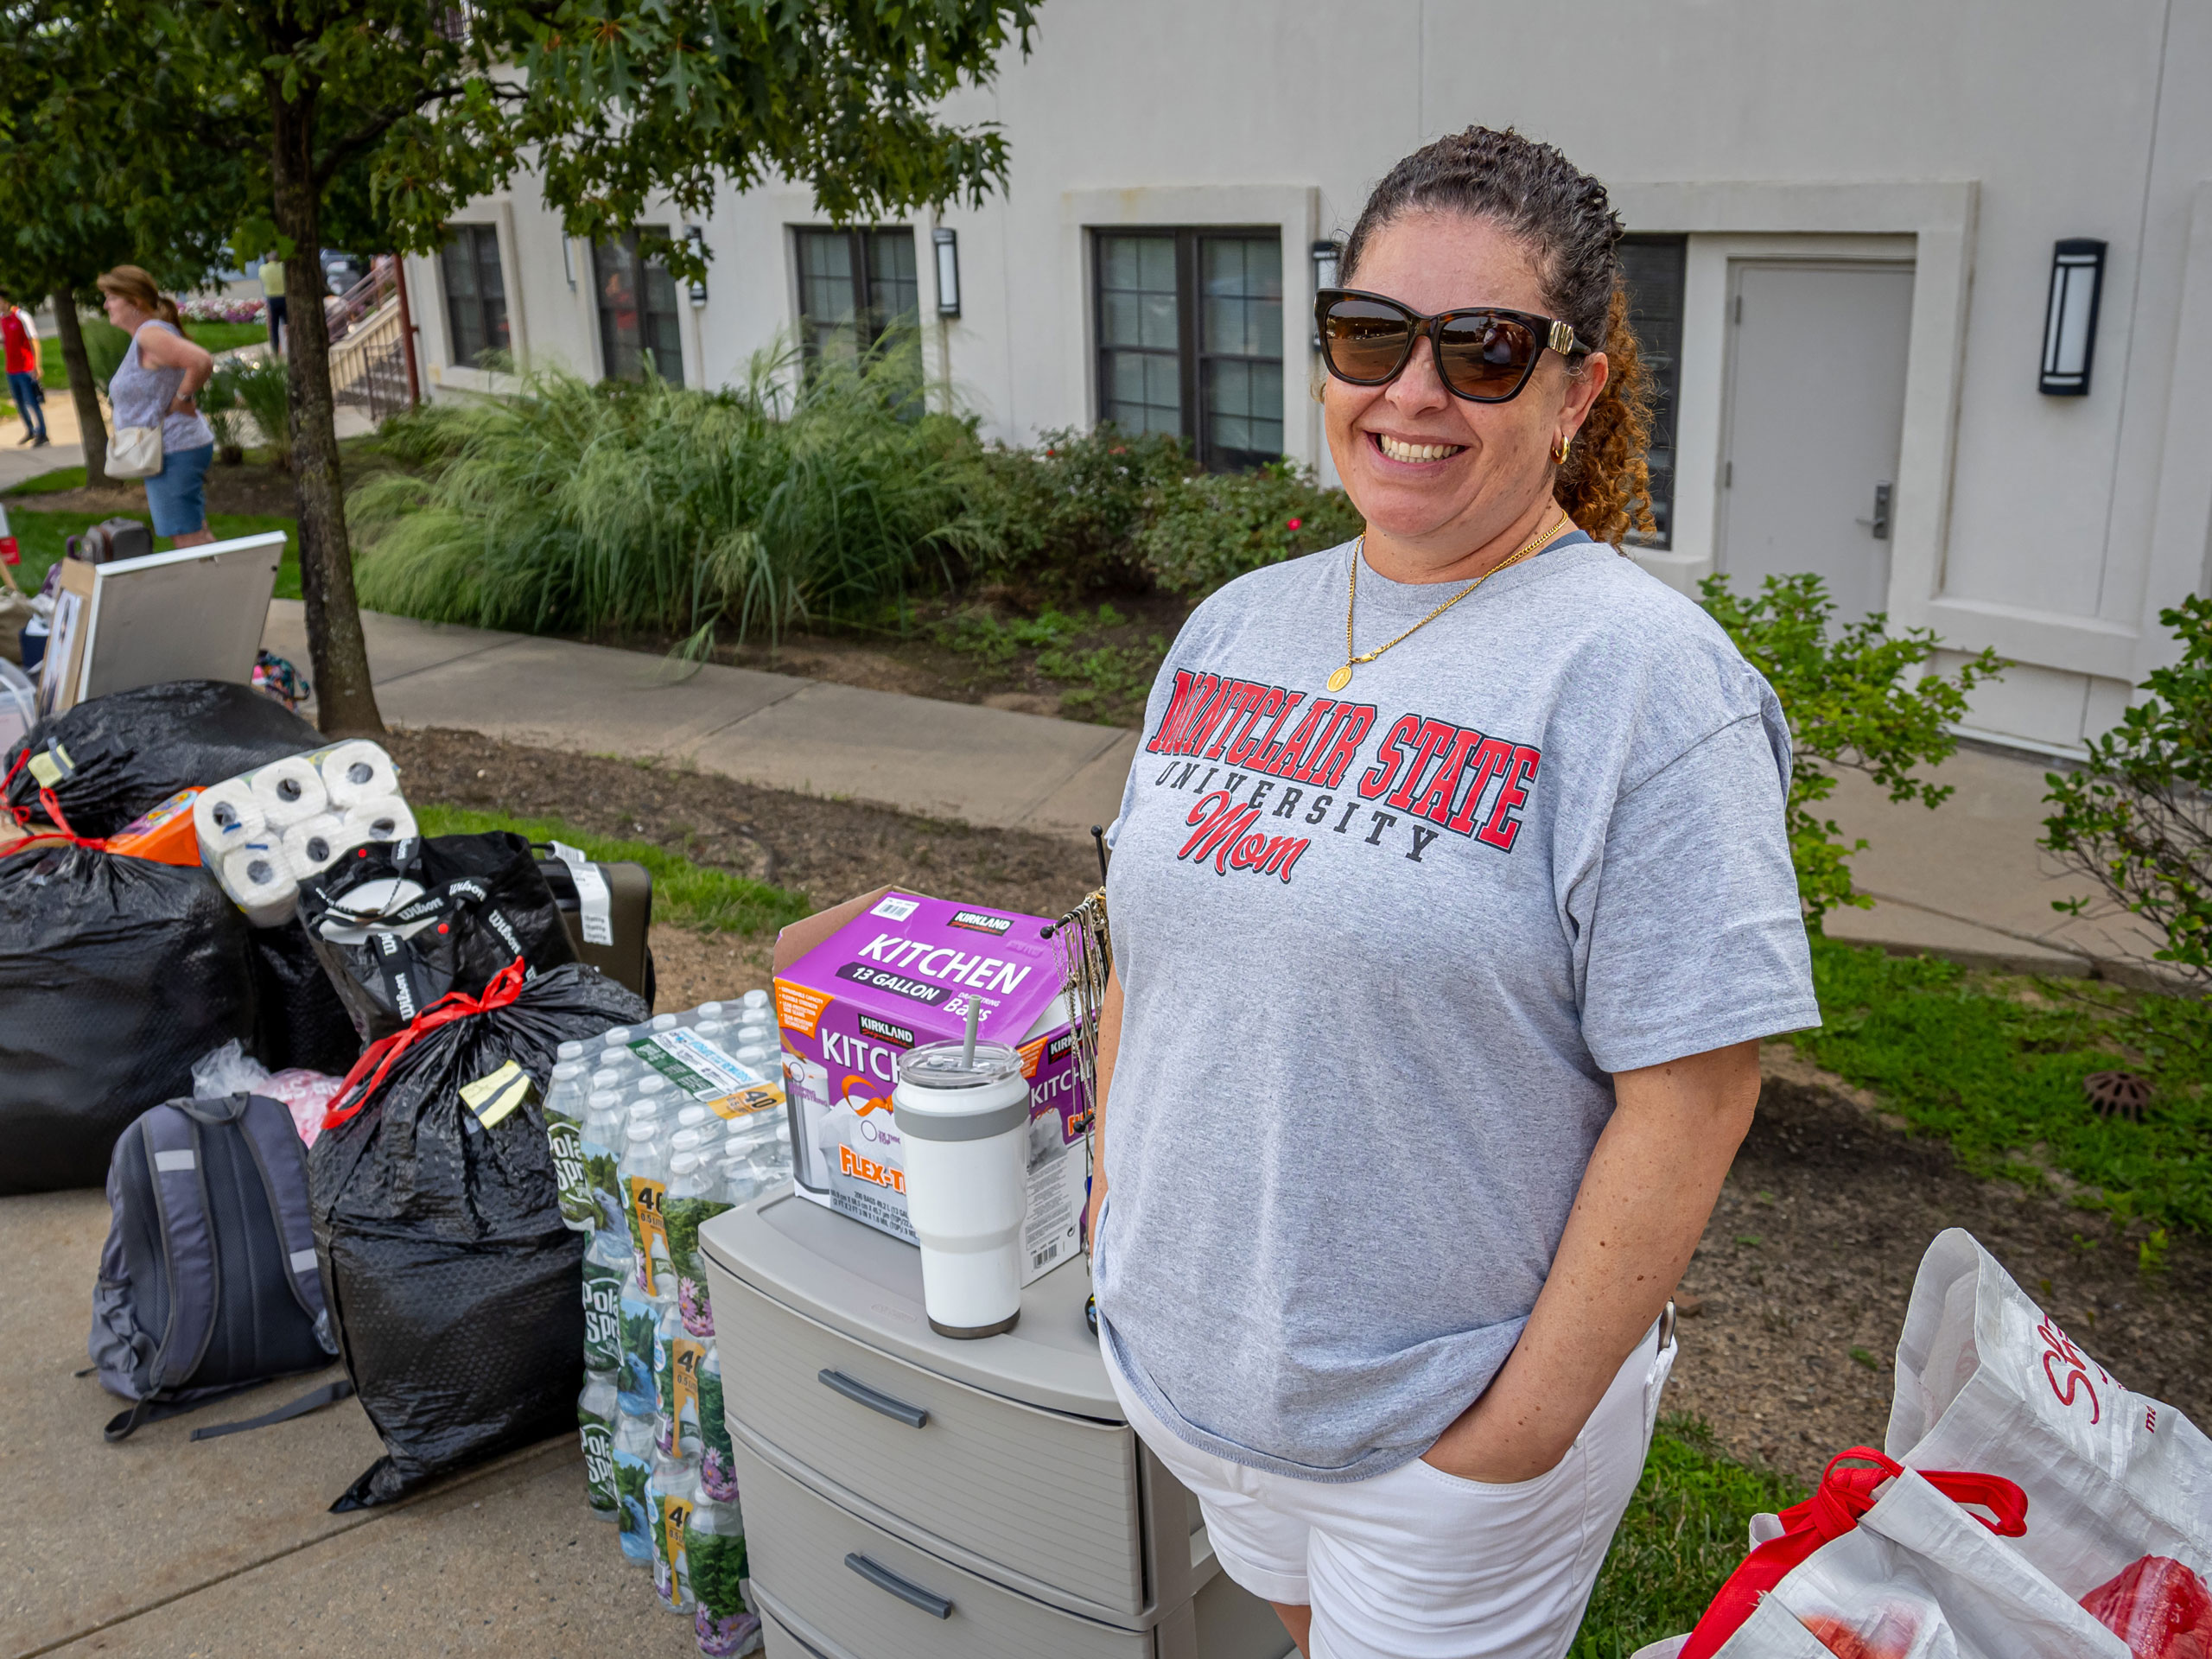 A woman wearing a Montclair "Mom" t-shirt smiles next to a row of residential supplies.